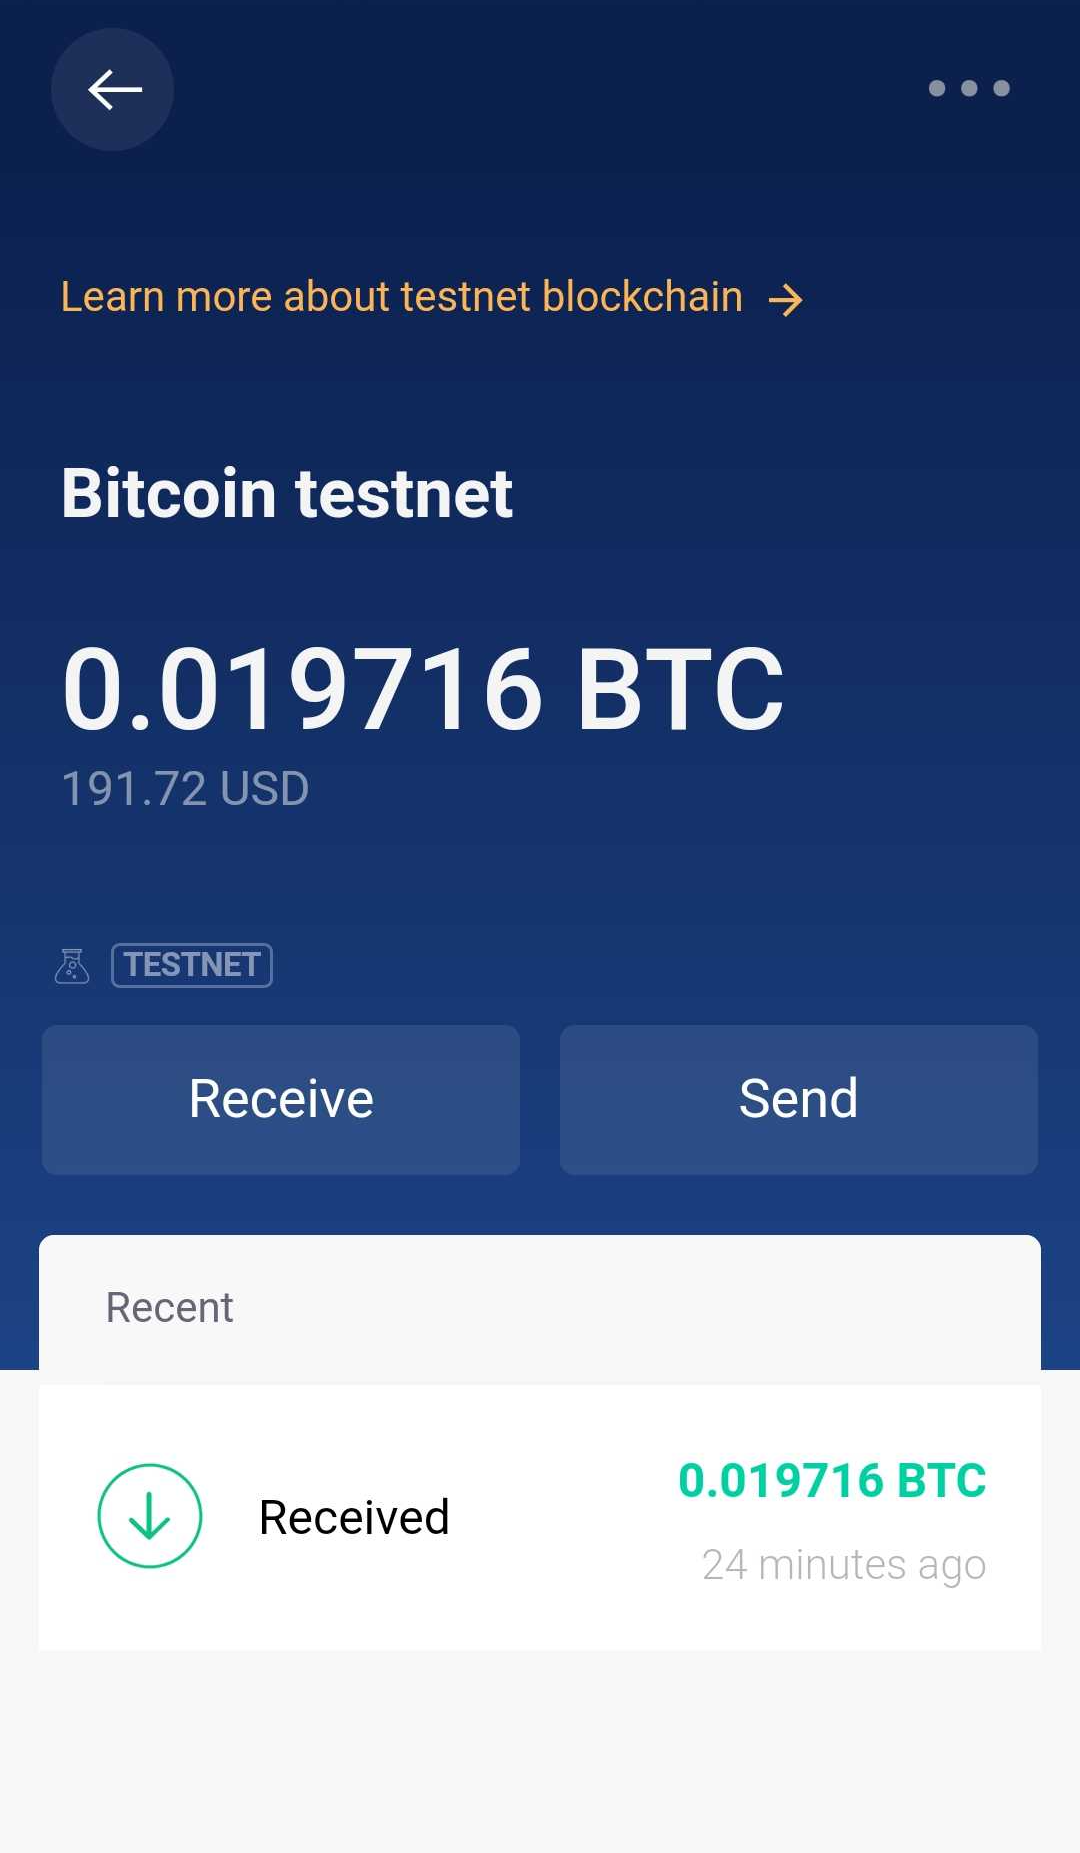 How to use wallet connet and how to get testnet bitcoins - family-gadgets.ru